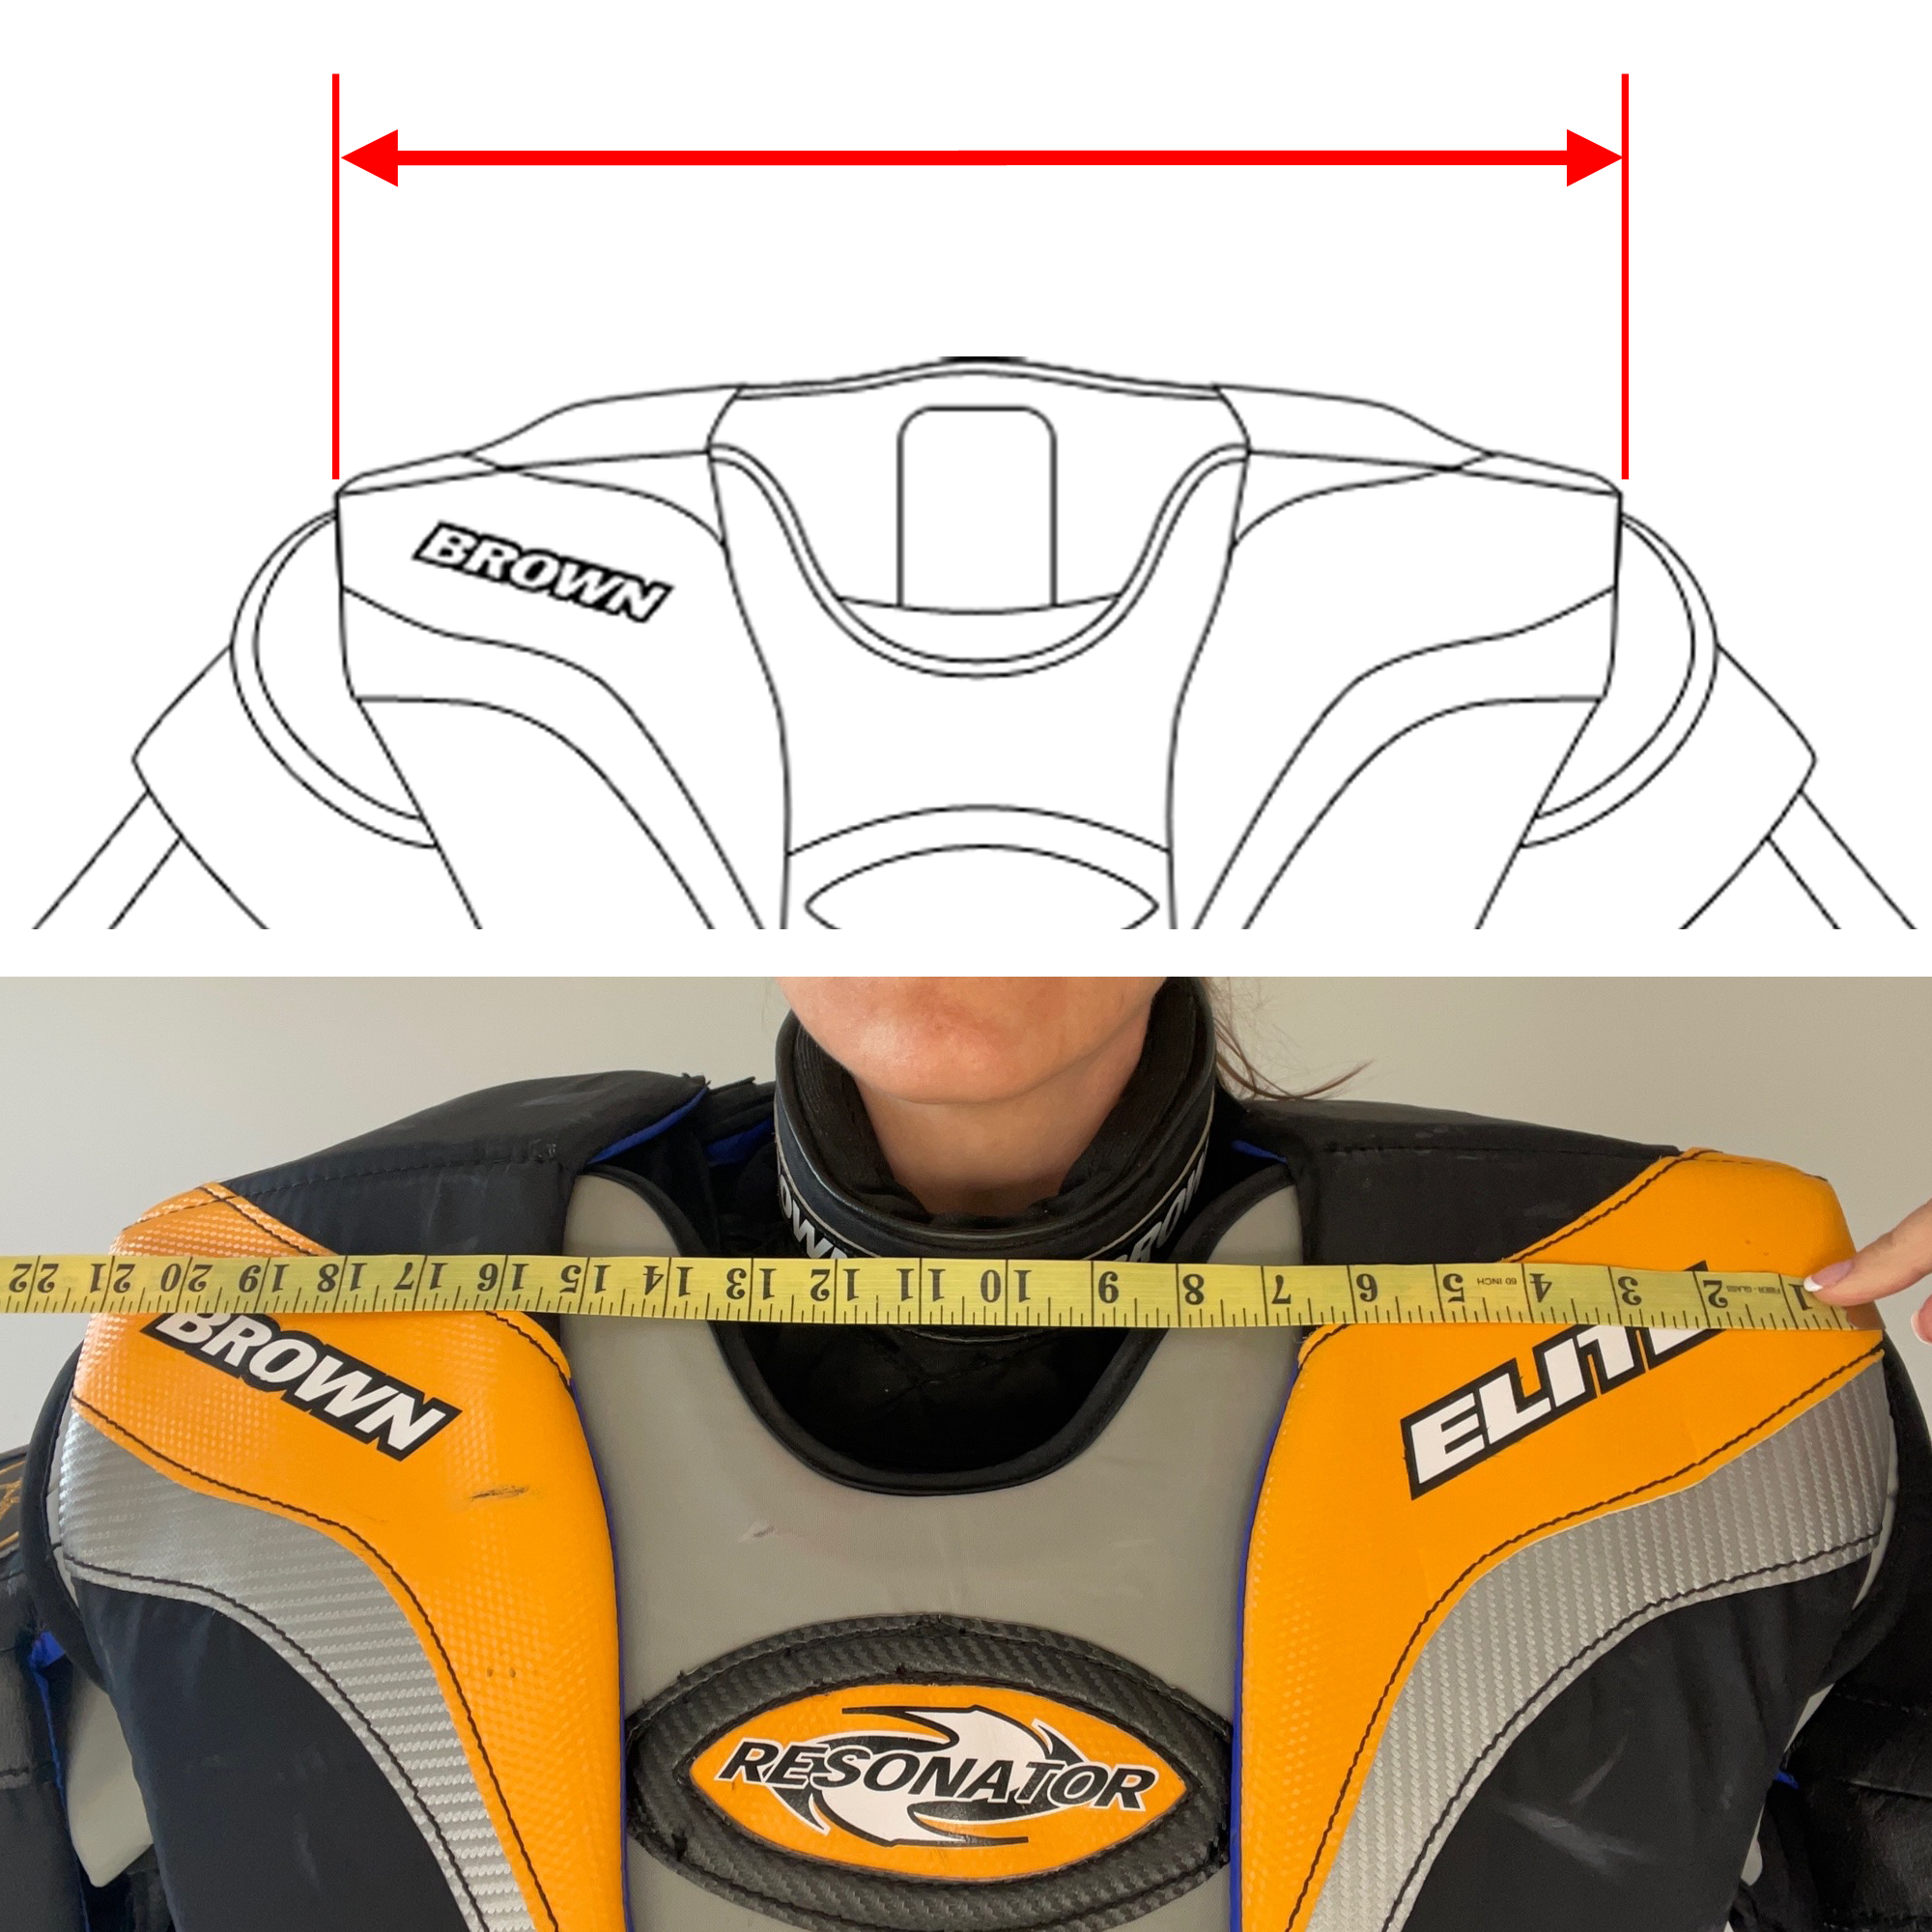 Measuring shoulder to shoulder with chest protector on